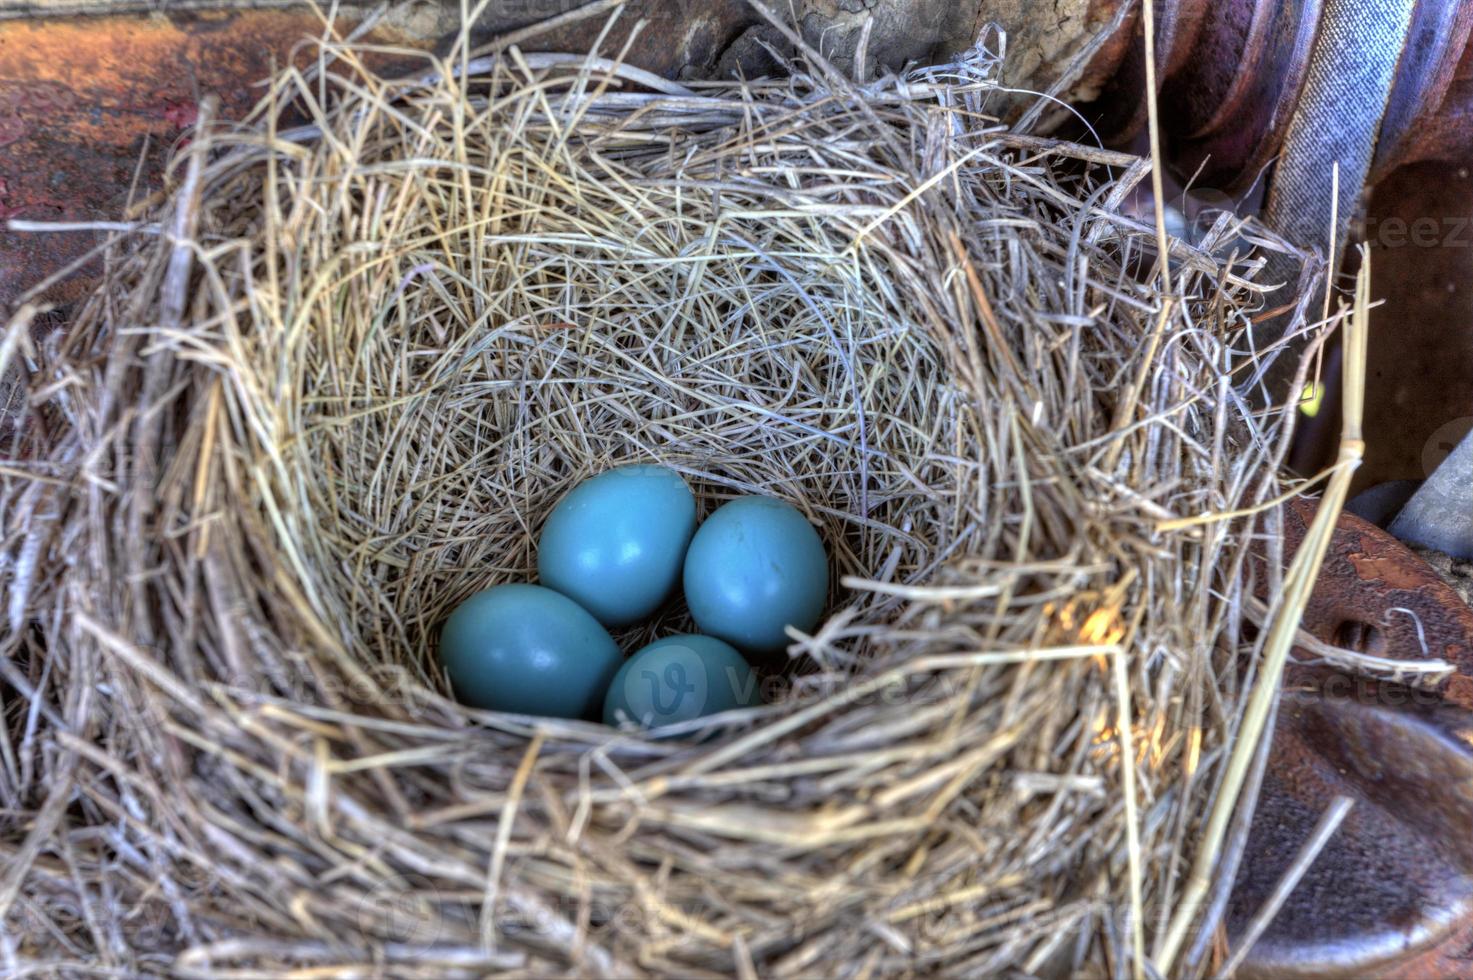 Robins nest in old tractor photo